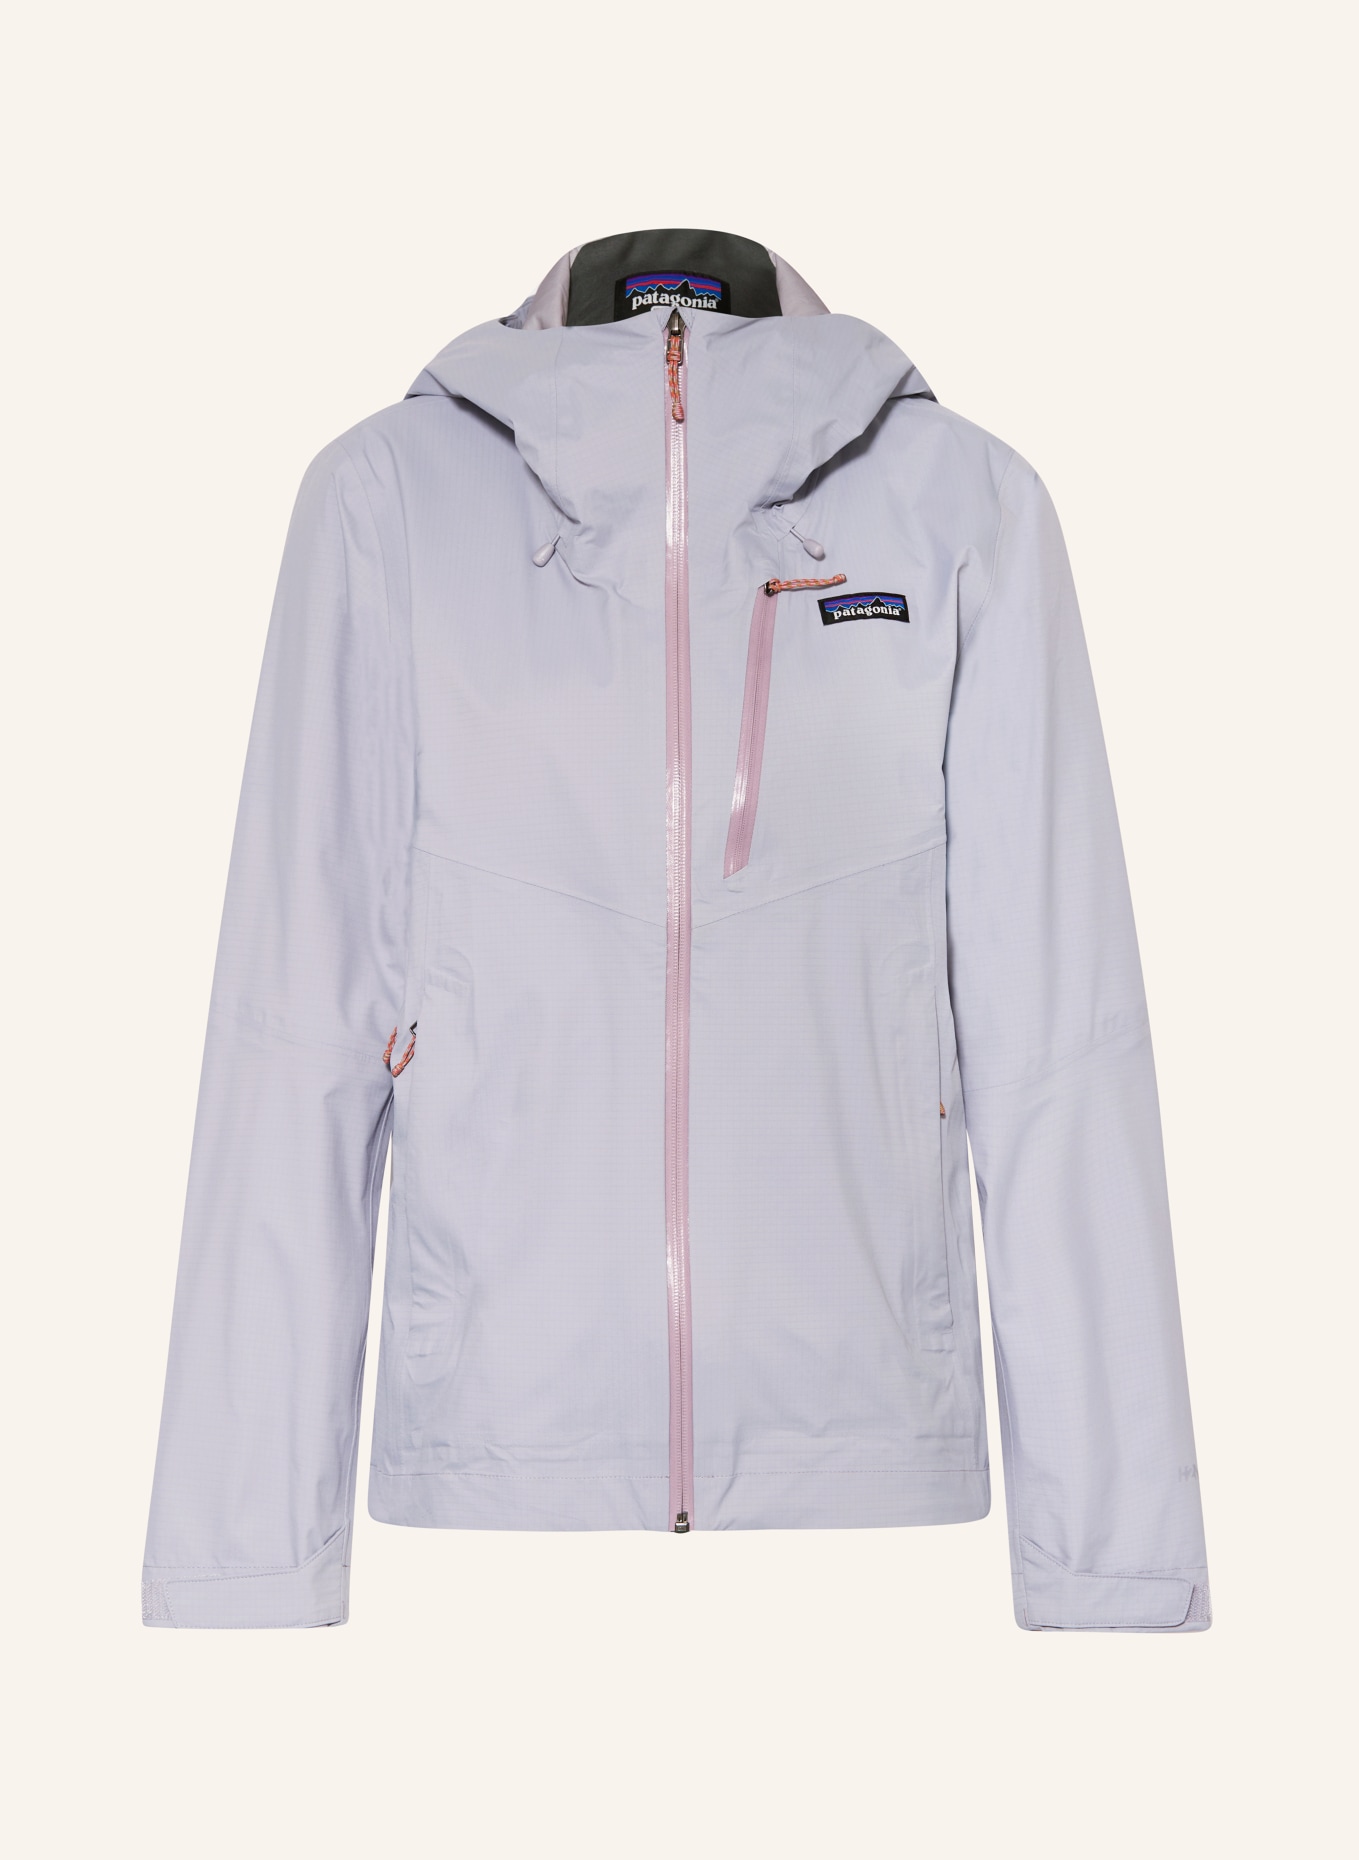 patagonia Outdoor jacket GRANITE CREST, Color: LIGHT GRAY (Image 1)